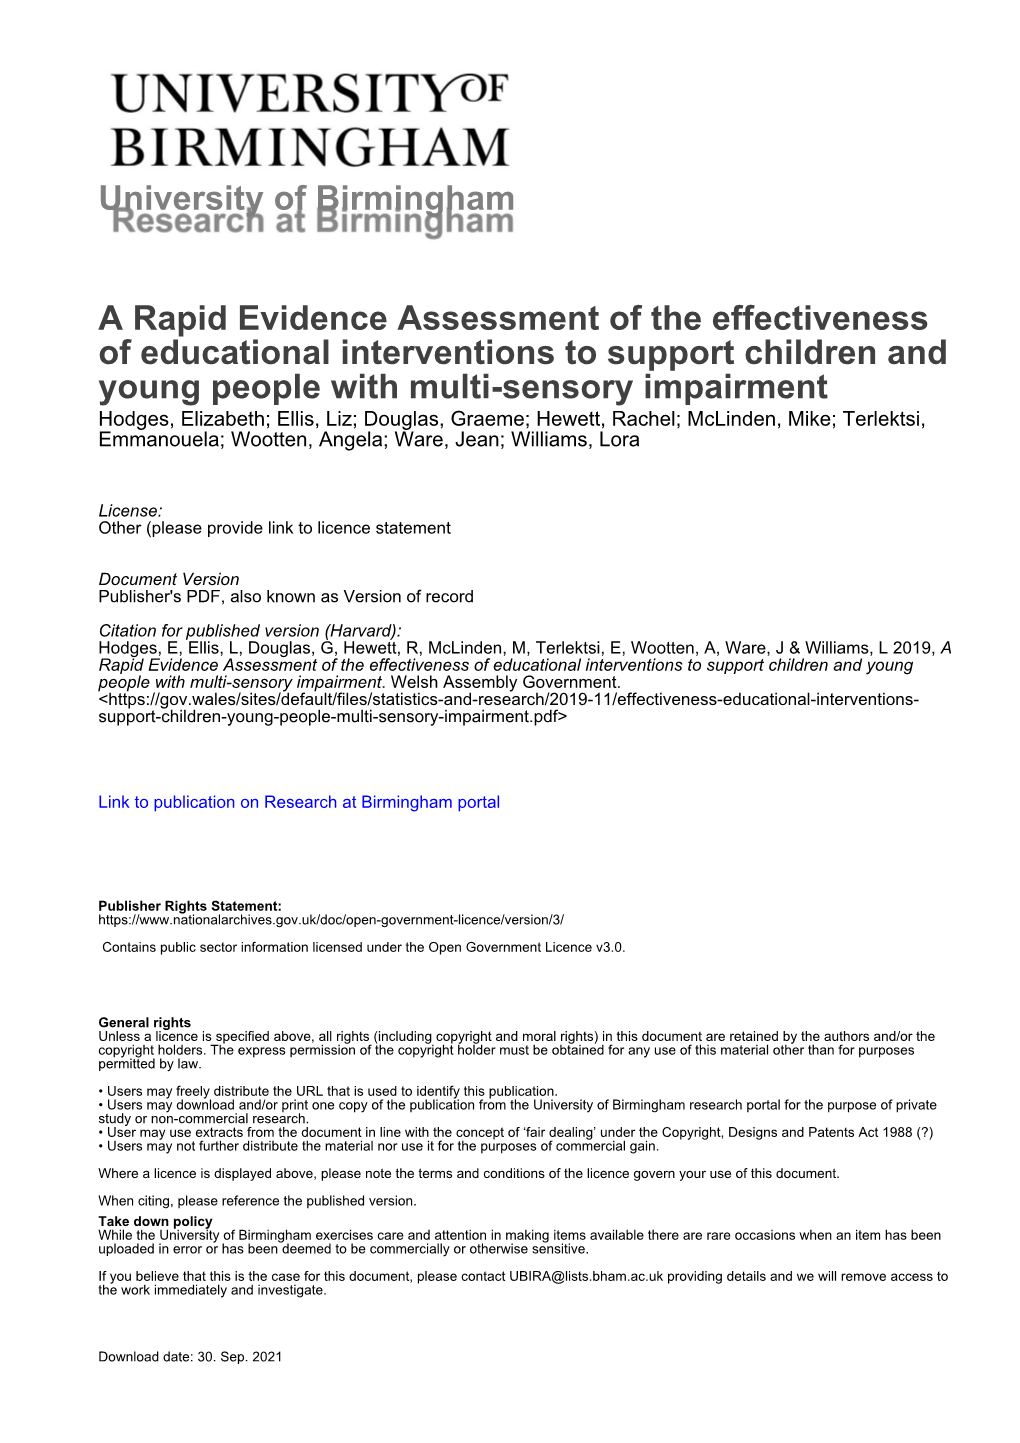 A Rapid Evidence Assessment of the Effectiveness of Educational